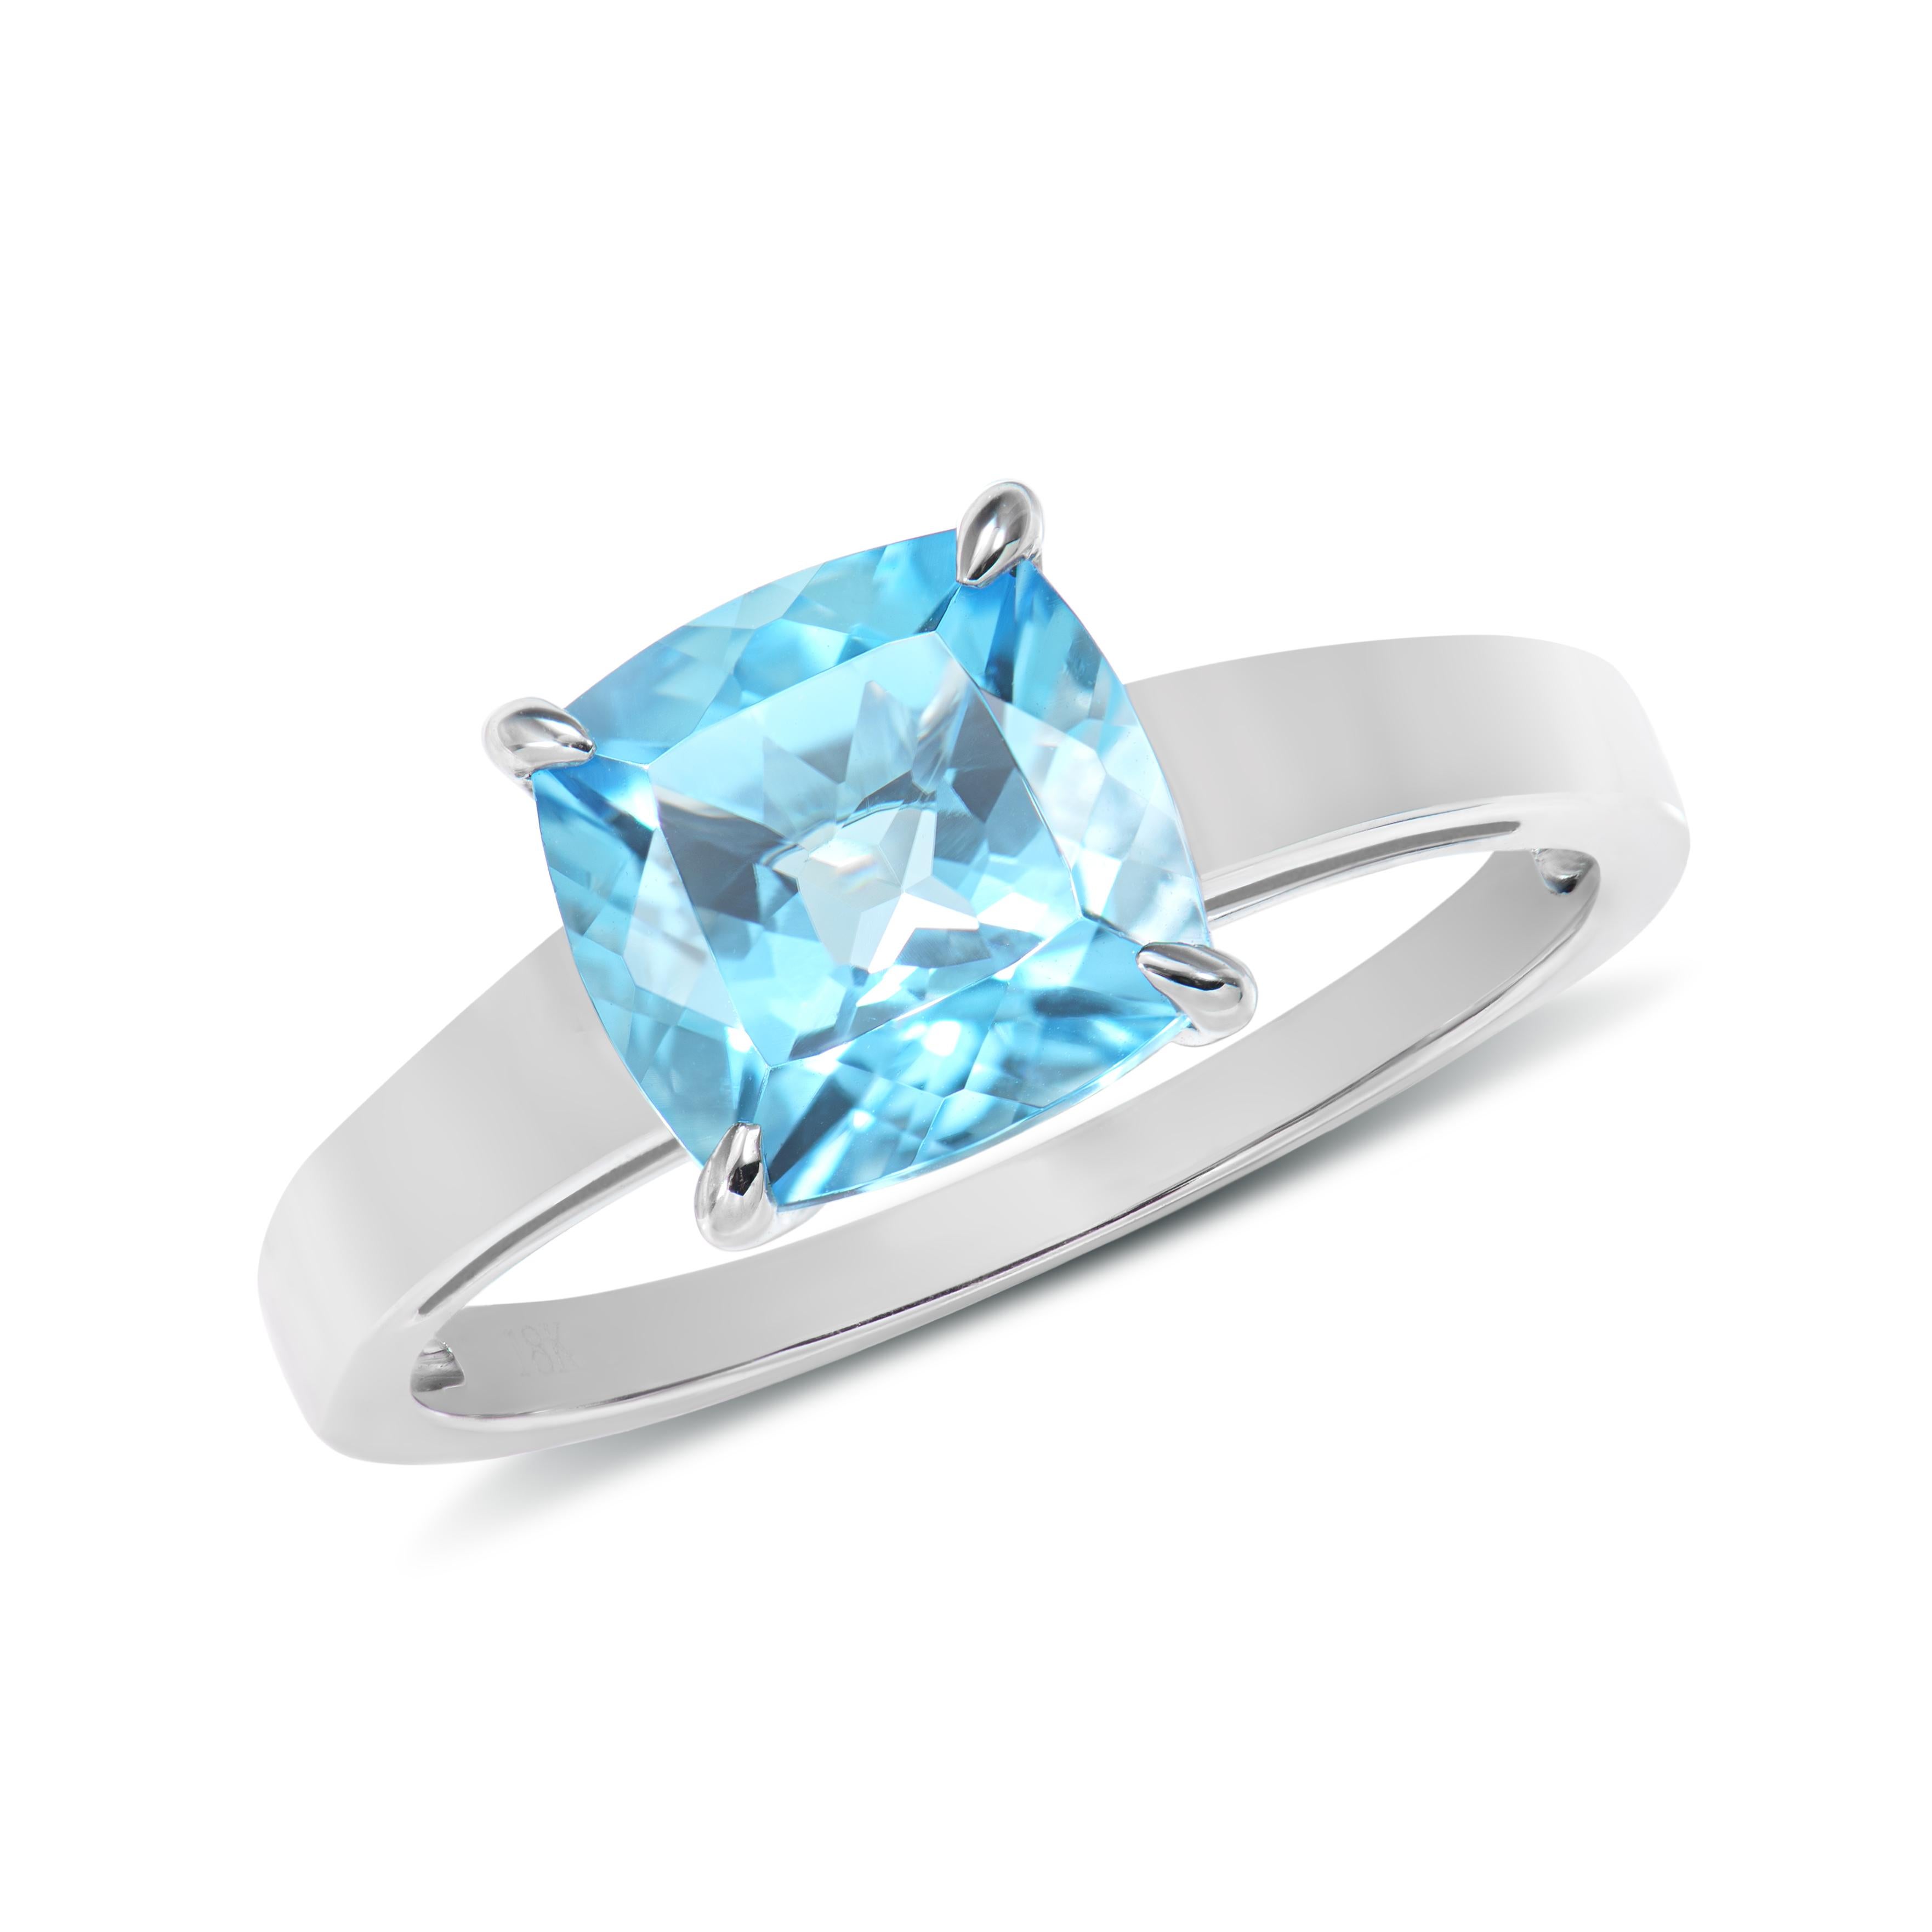 Presented A lovely collection of gems, including Amethyst, Sky Blue Topaz, and Swiss Blue Topaz is perfect for people who value quality and want to wear it to any occasion or celebration. The white gold sky blue topaz ring offer a classic yet